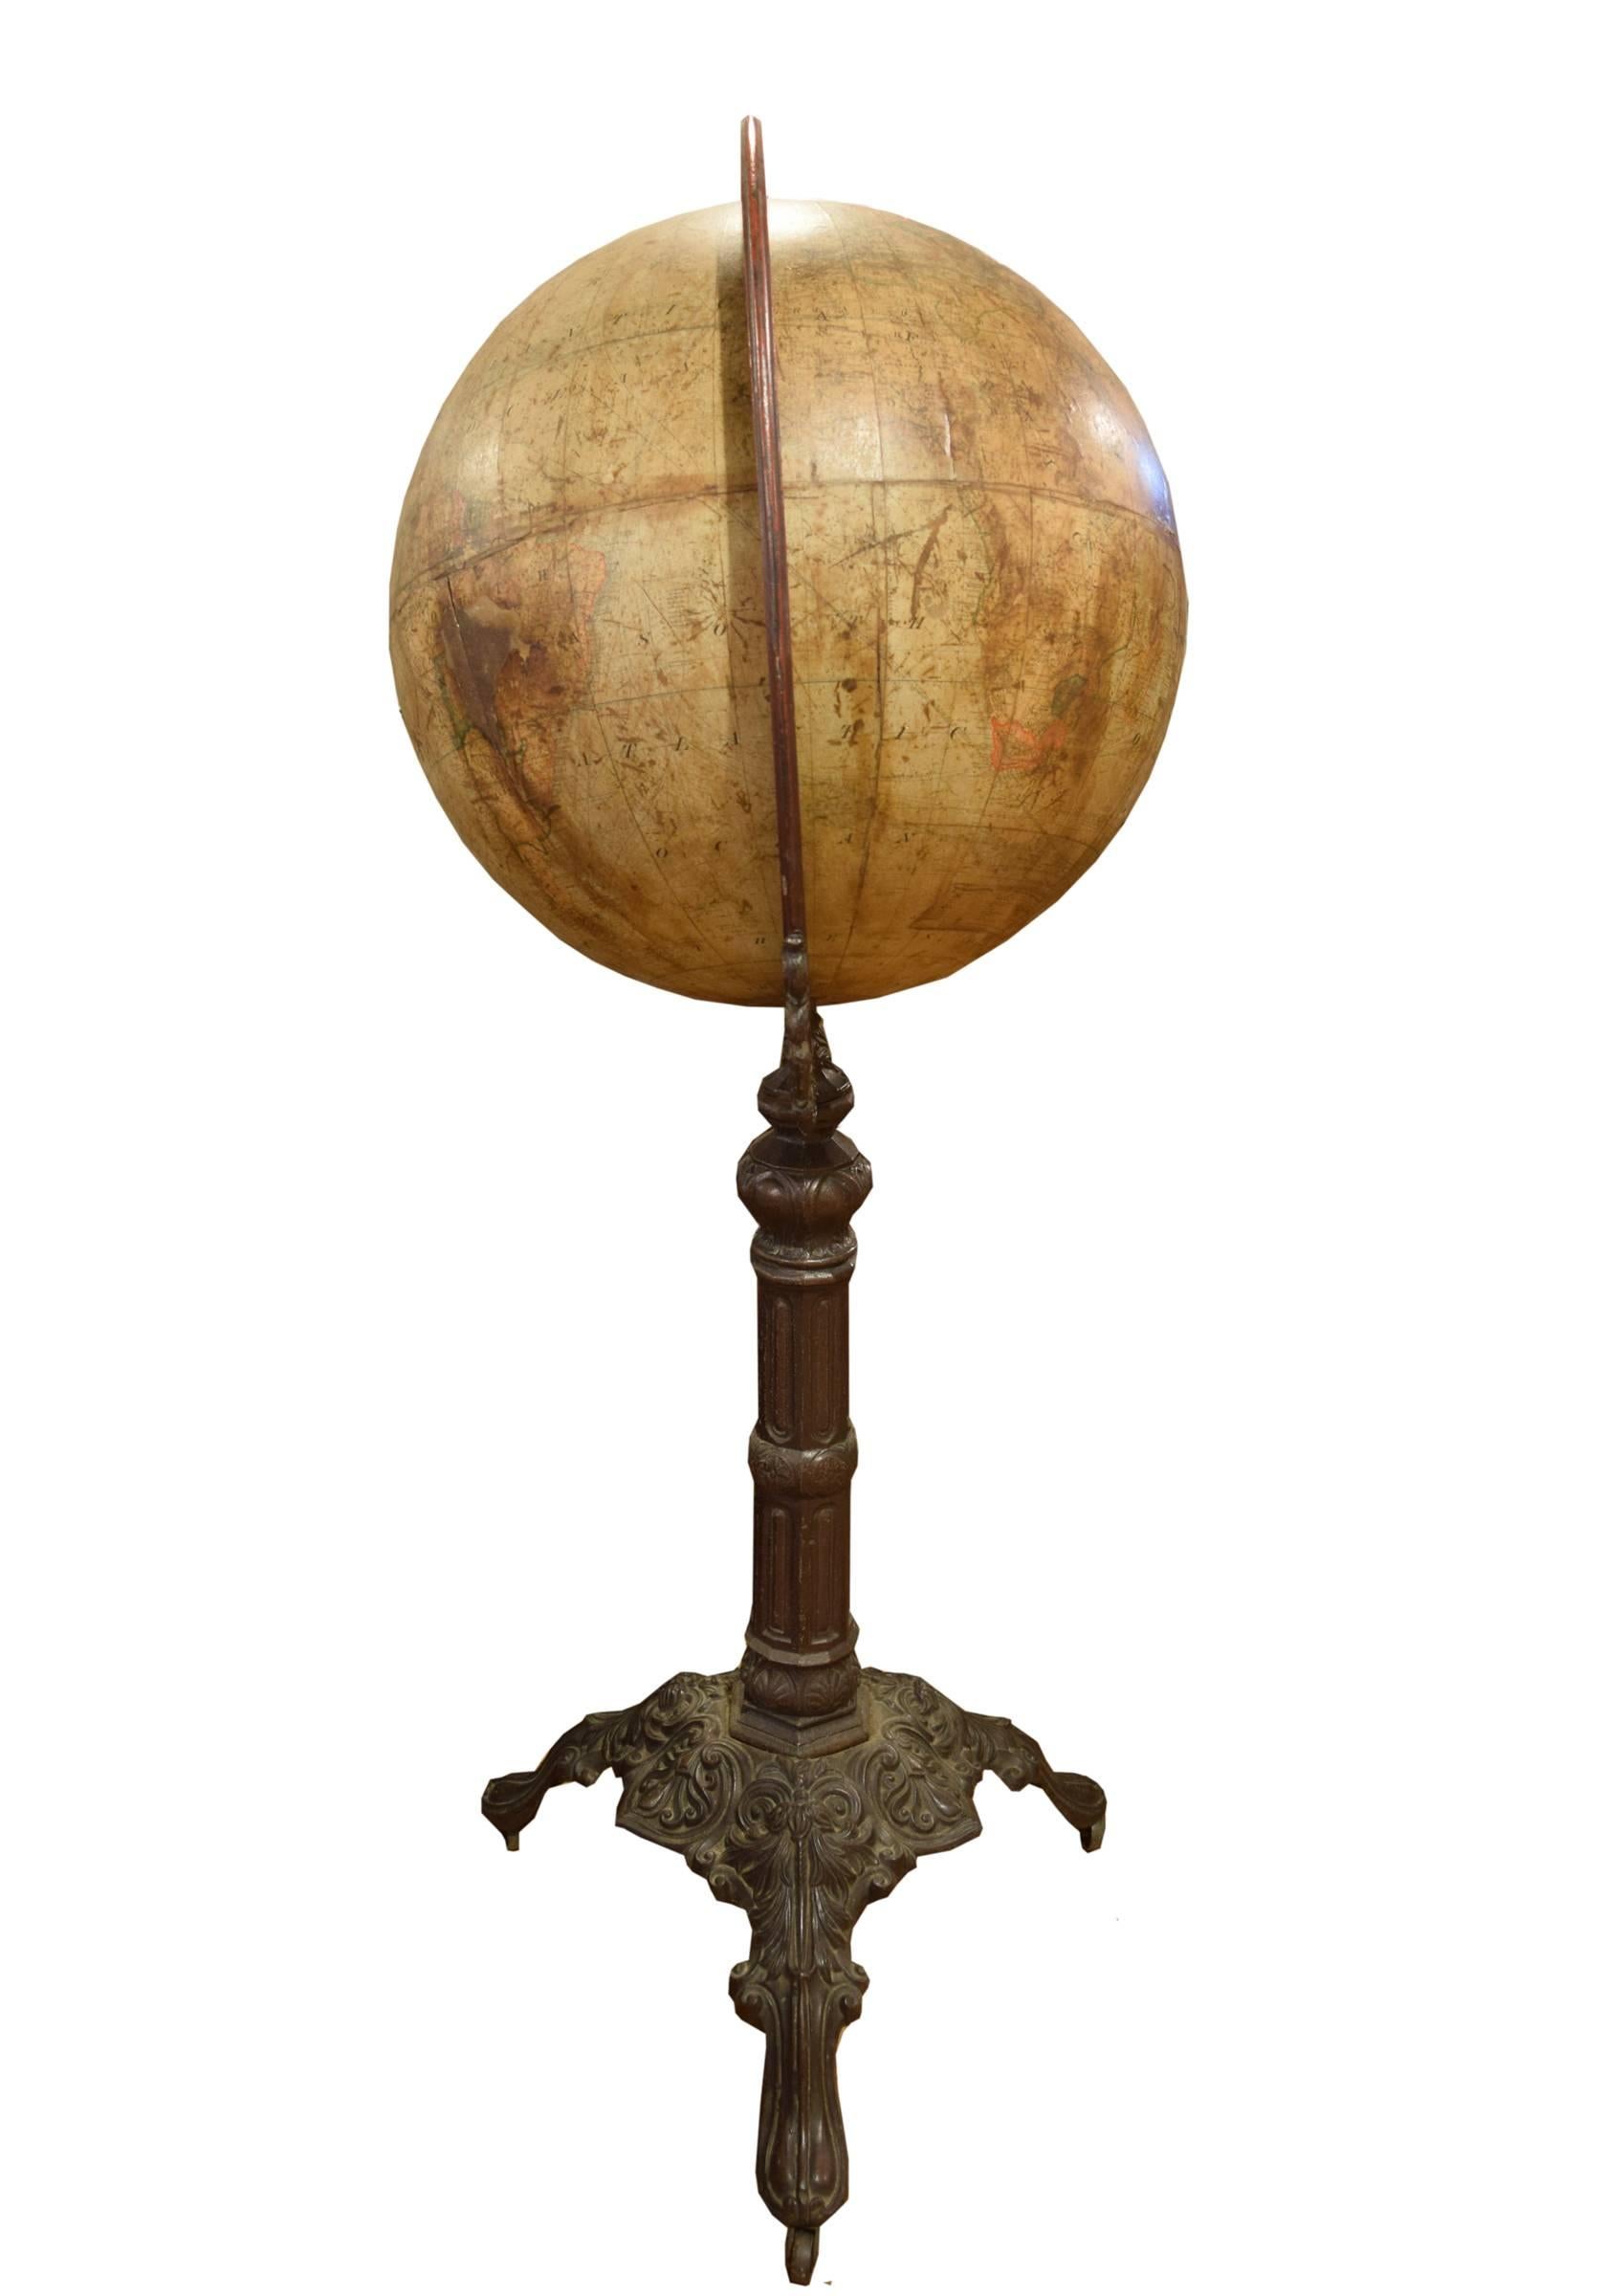 A rare circa 1870, 20” globe by award winning globe maker Joseph Schedler. Schedler was a German immigrant who worked in New York and New Jersey. While other globes of this time tended to be printed in black on white and then colored by hand,